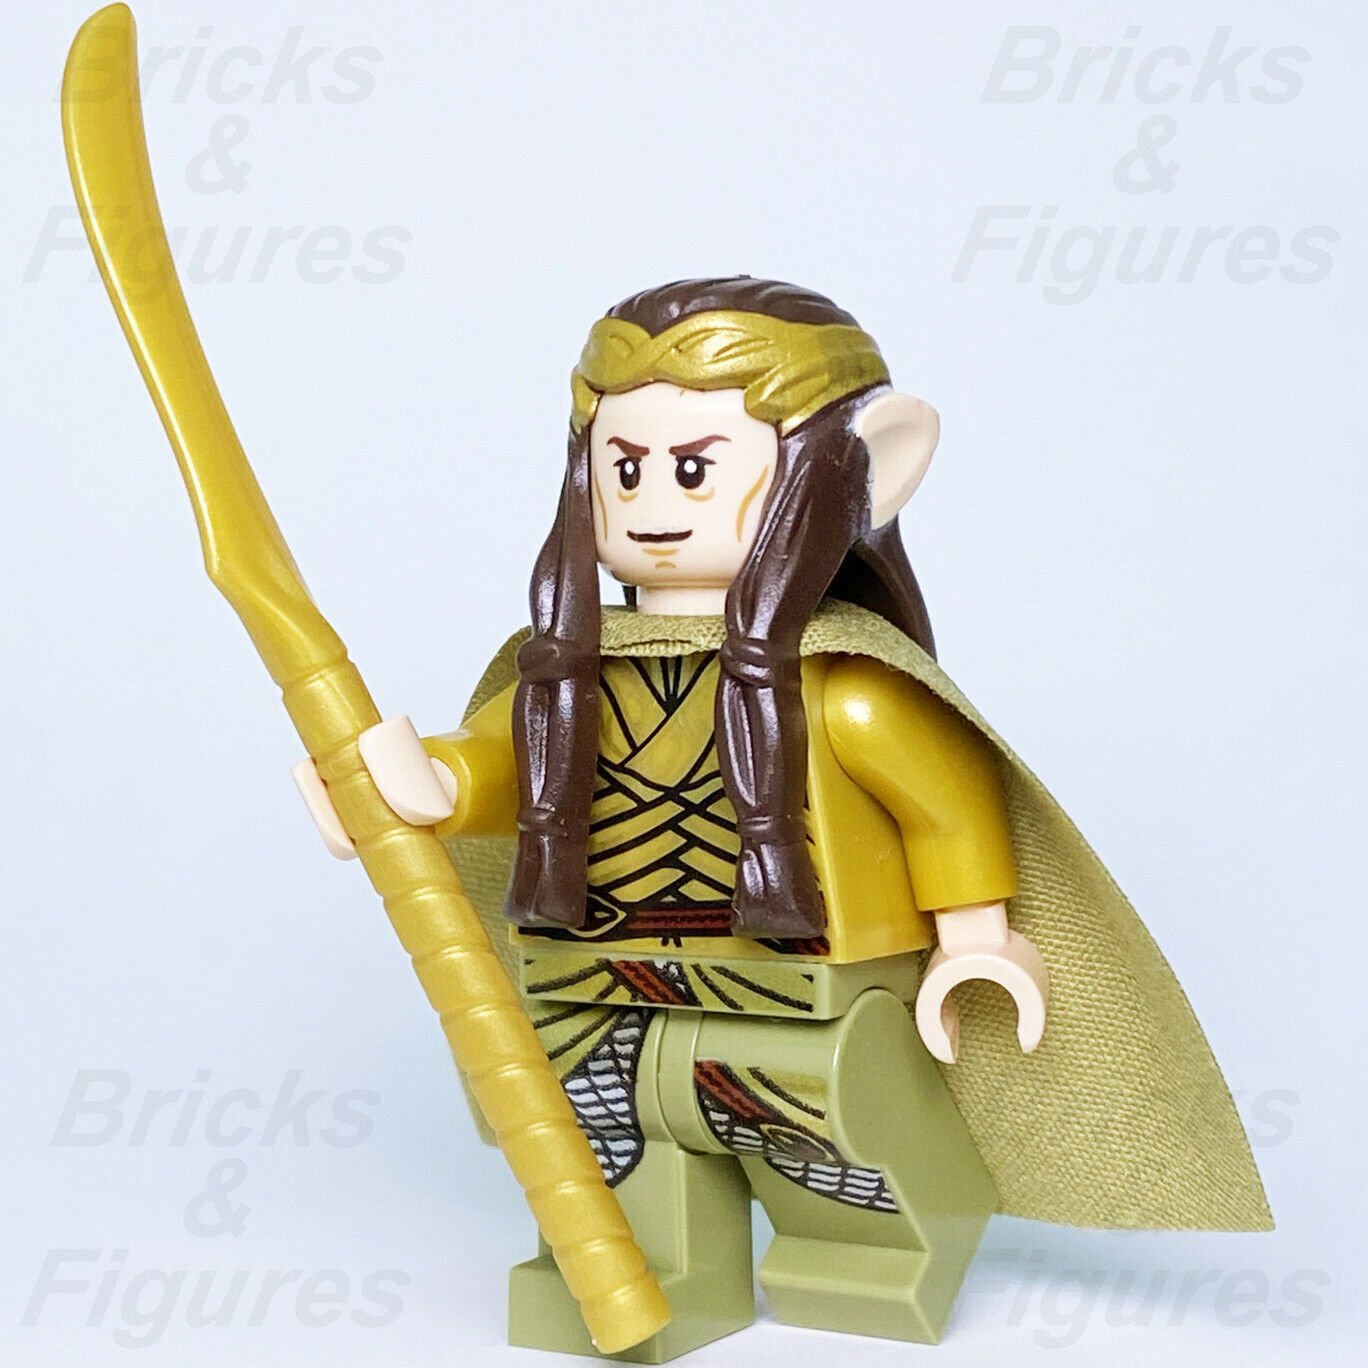 The Hobbit LEGO Elrond Rivendell Elf Lord of the Rings Minifigure 79015 lor105 - Bricks & Figures